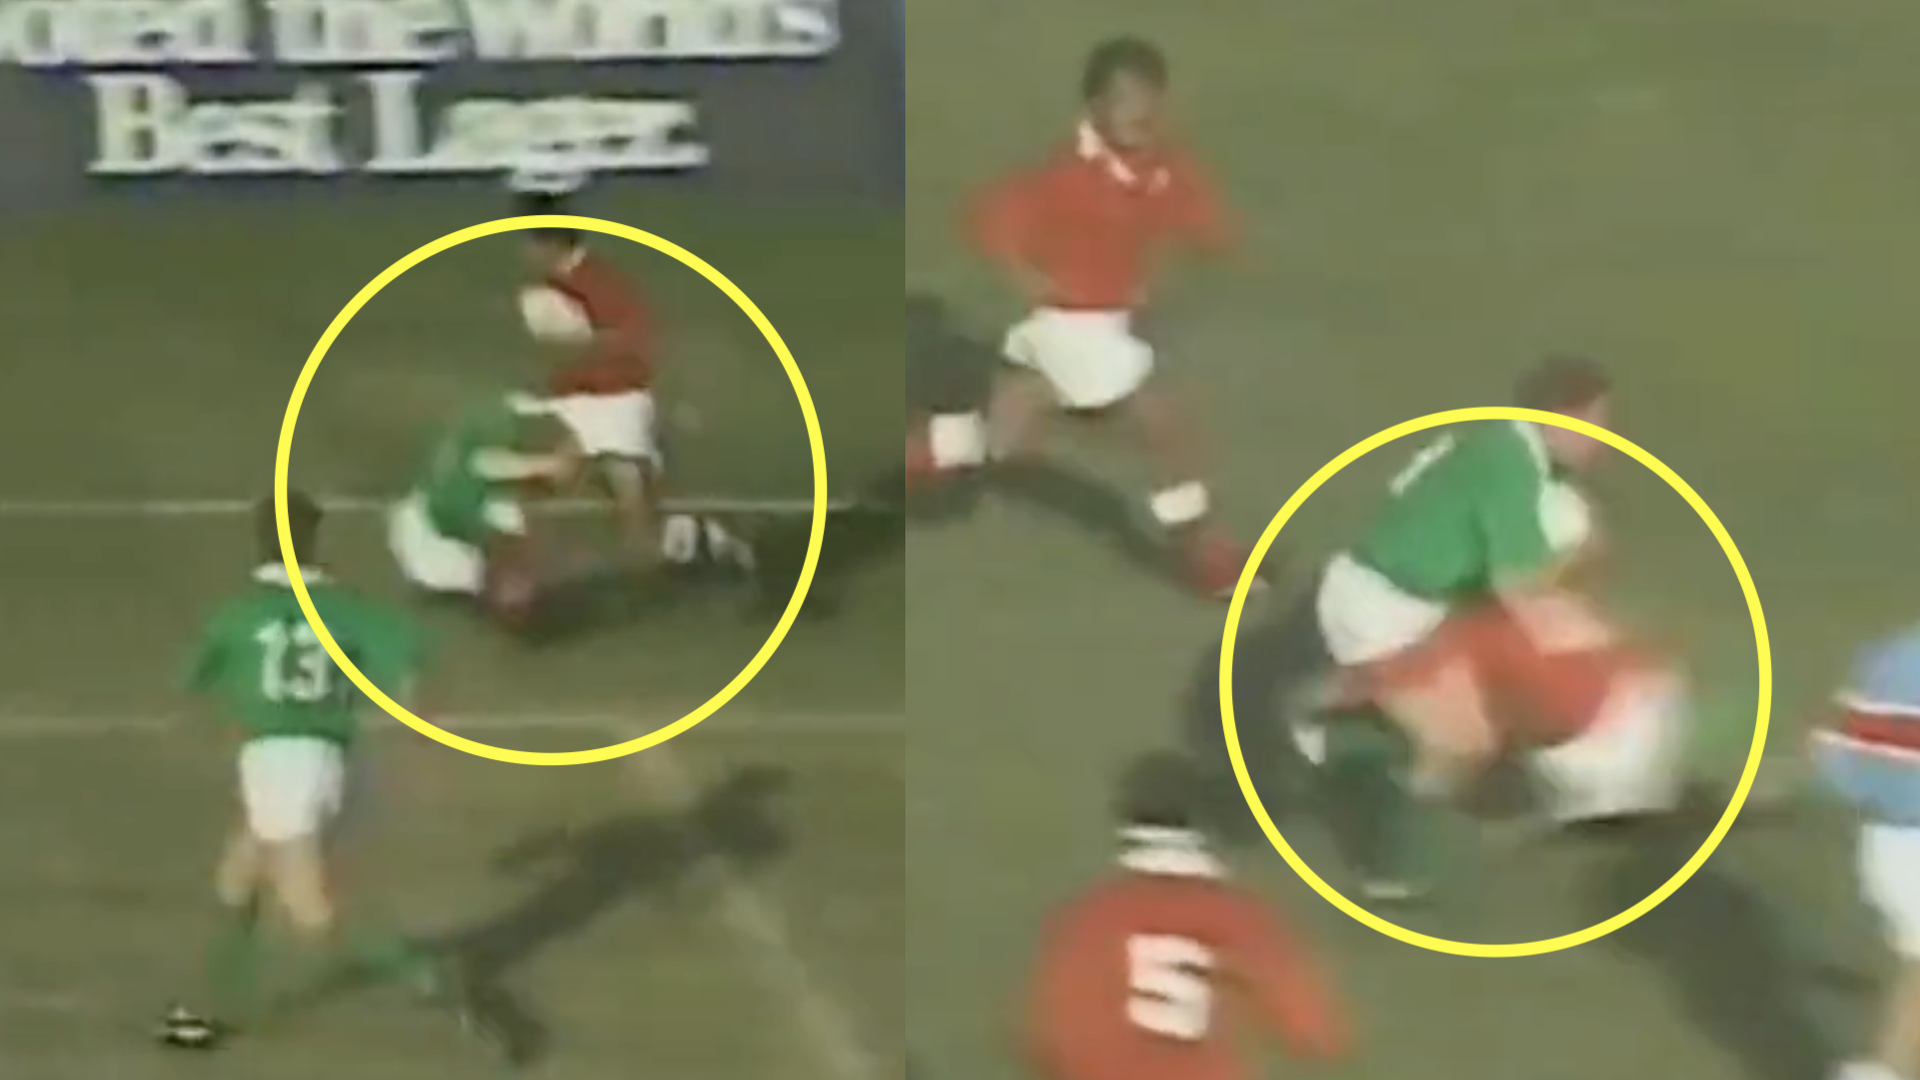 Old school match sparks online debate over tackle height laws